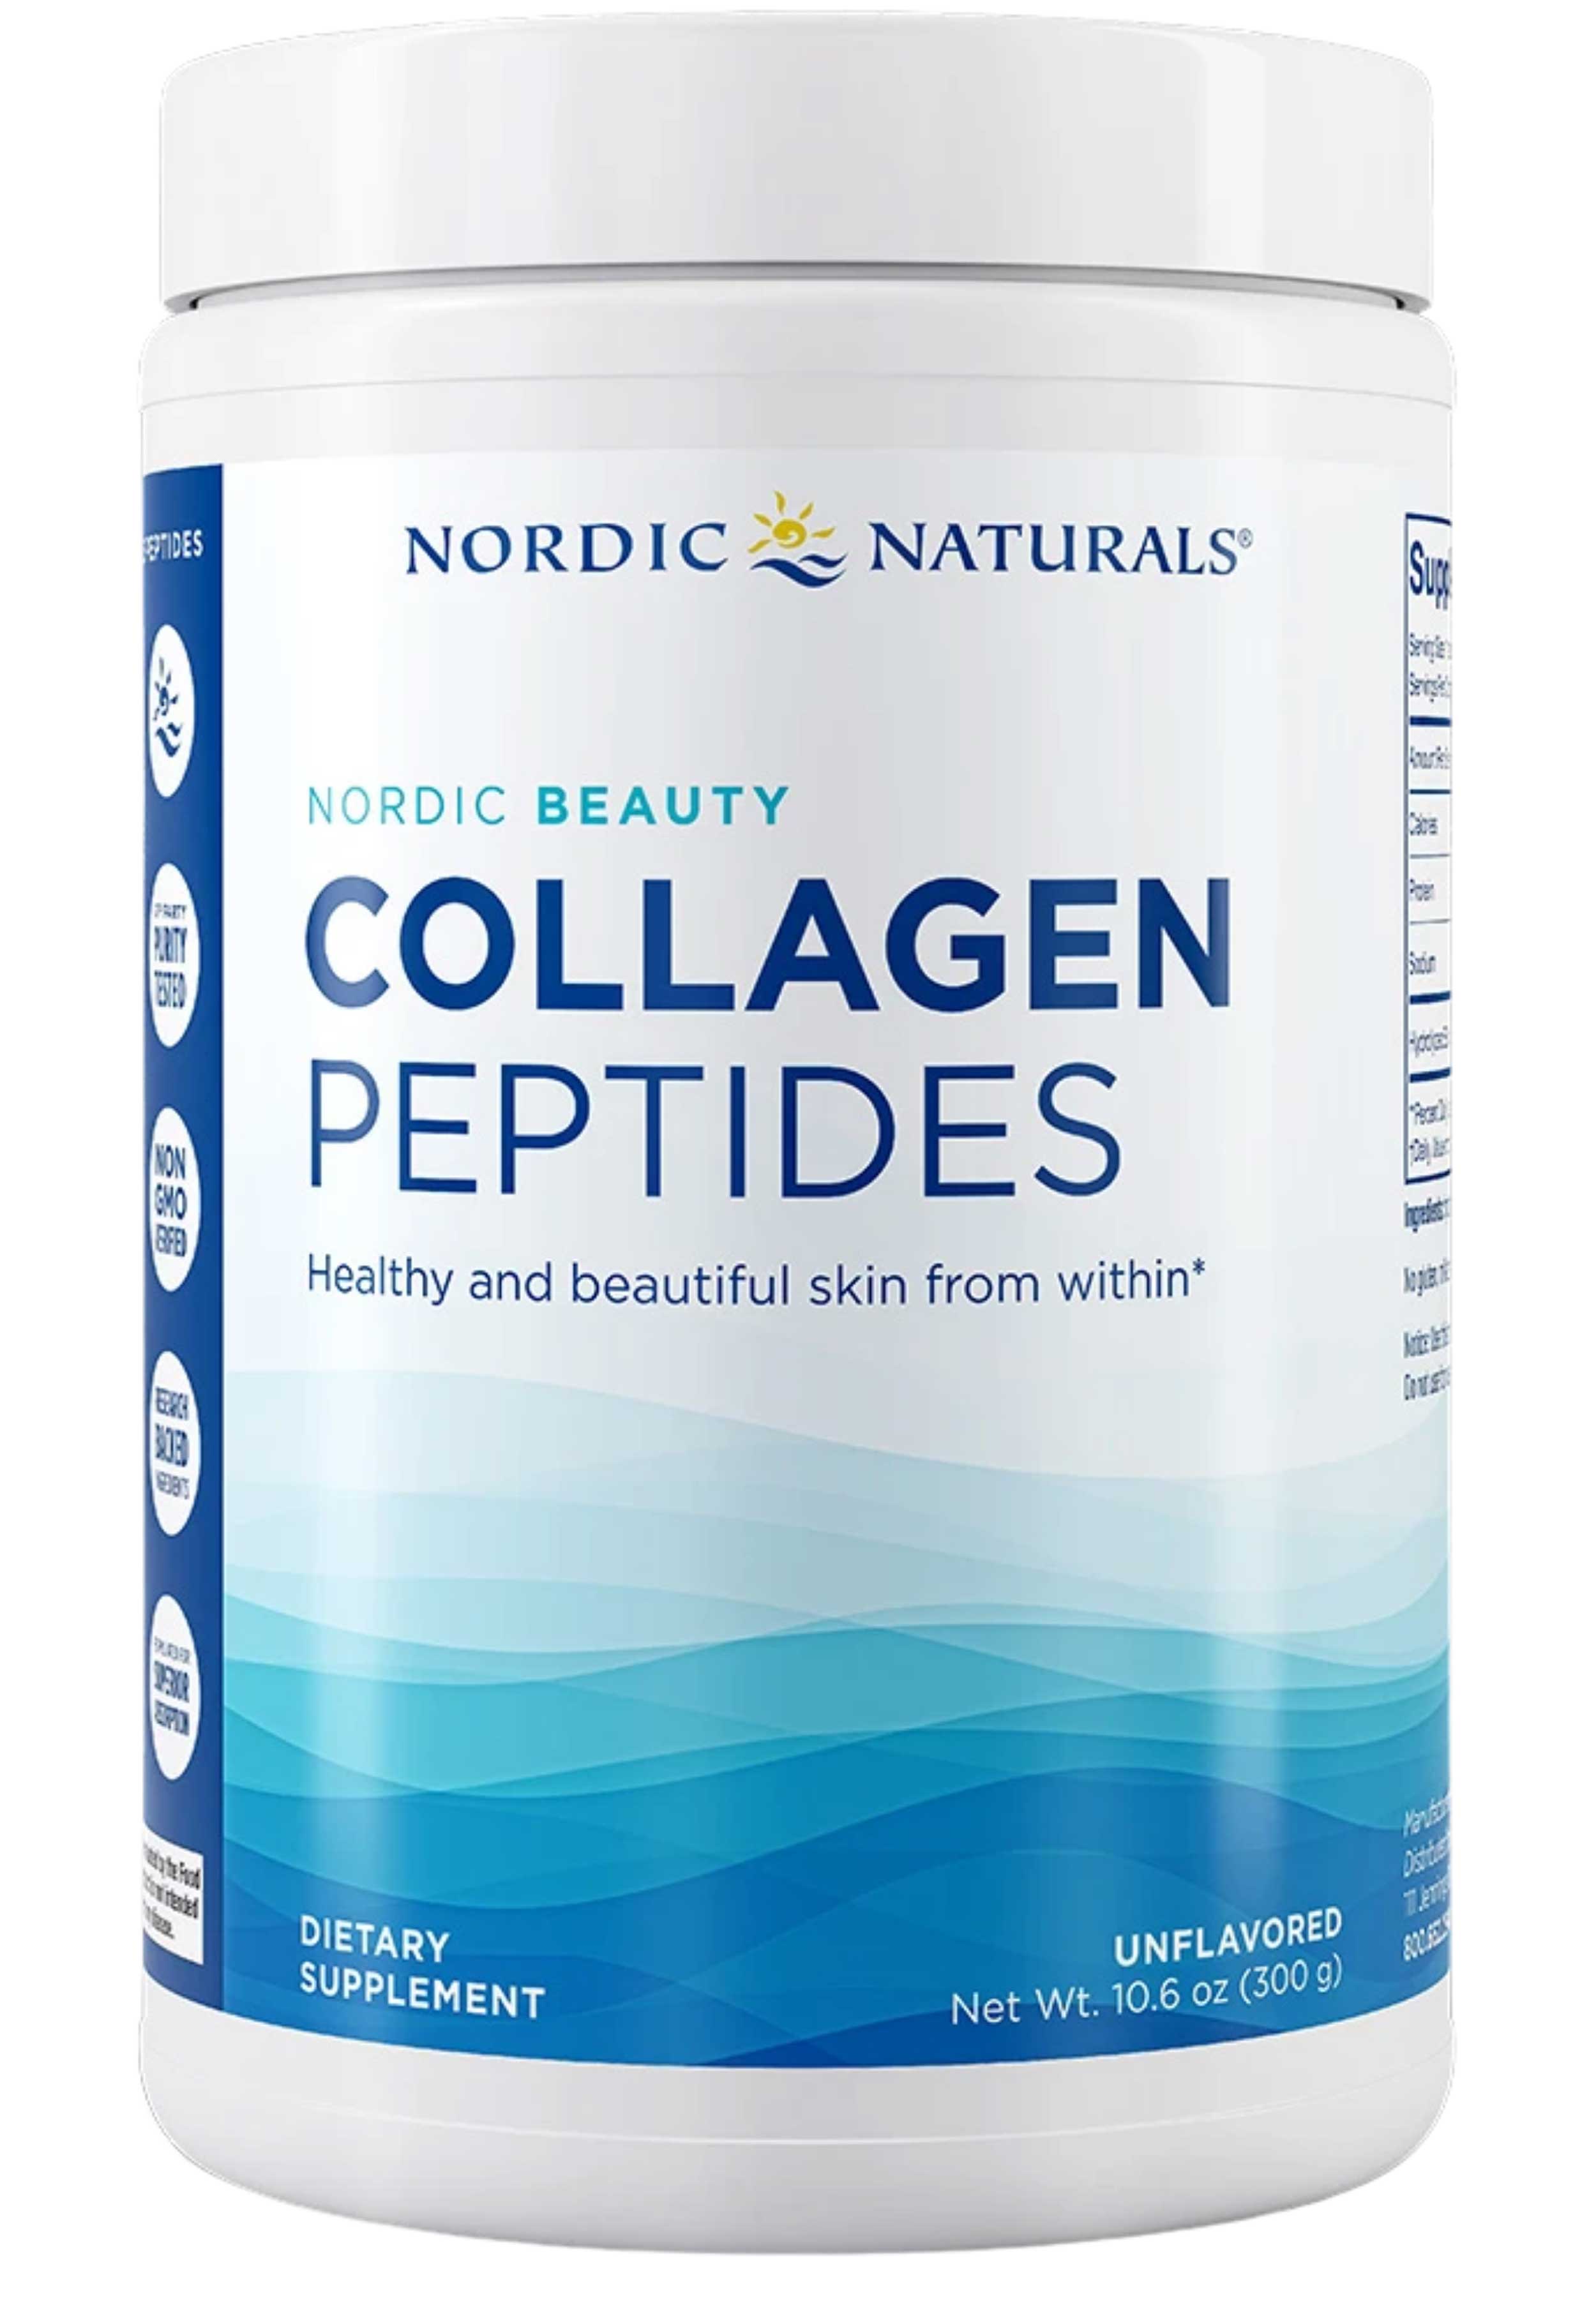 Nordic Naturals Nordic Beauty Collagen Peptides